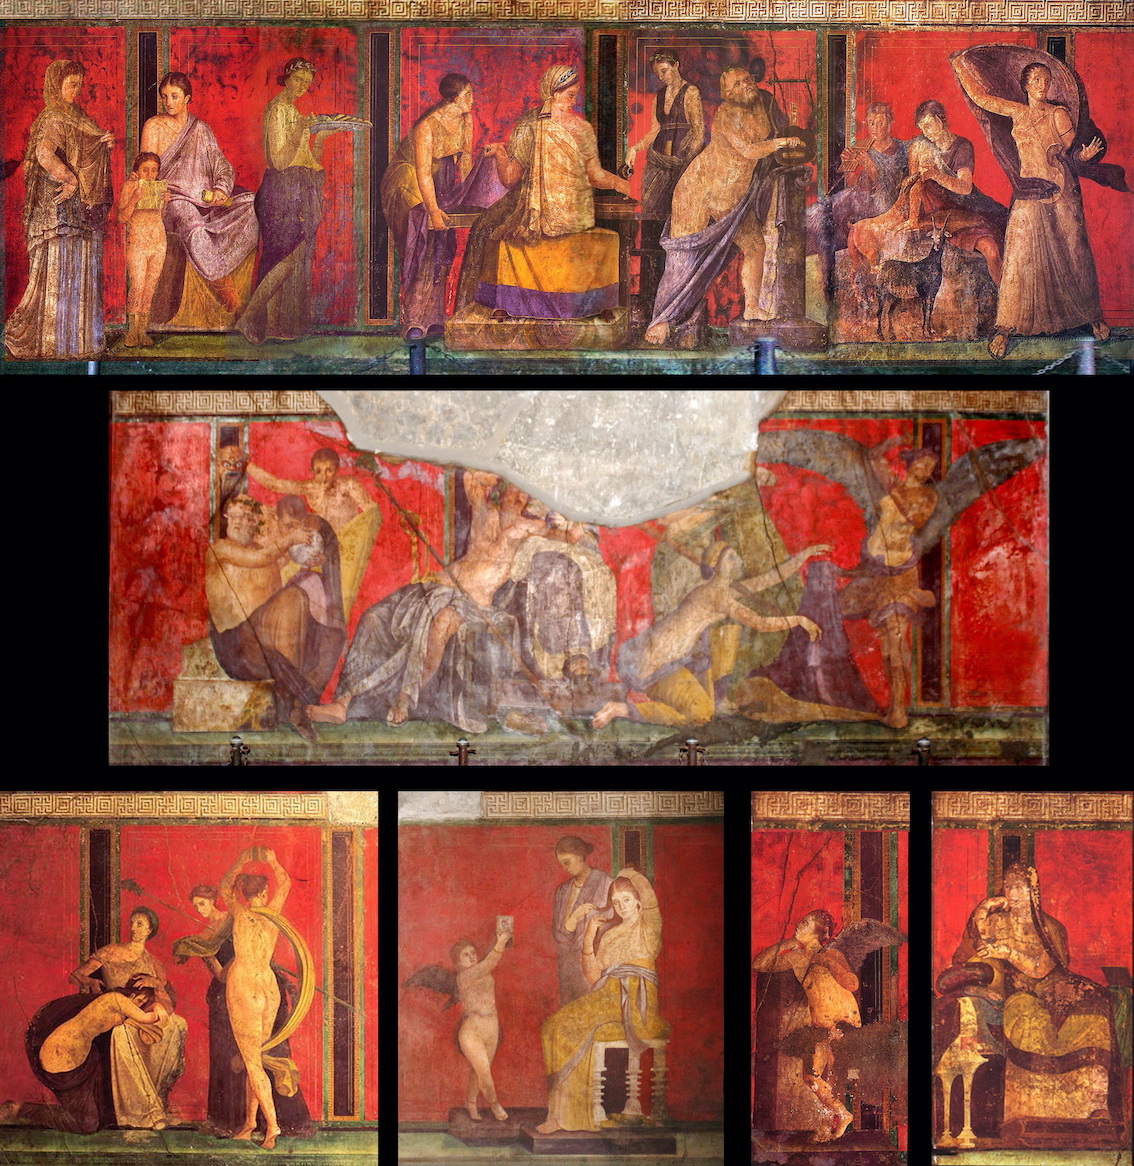 Frescoes from the Villa of the Mysteries in Pompeii.